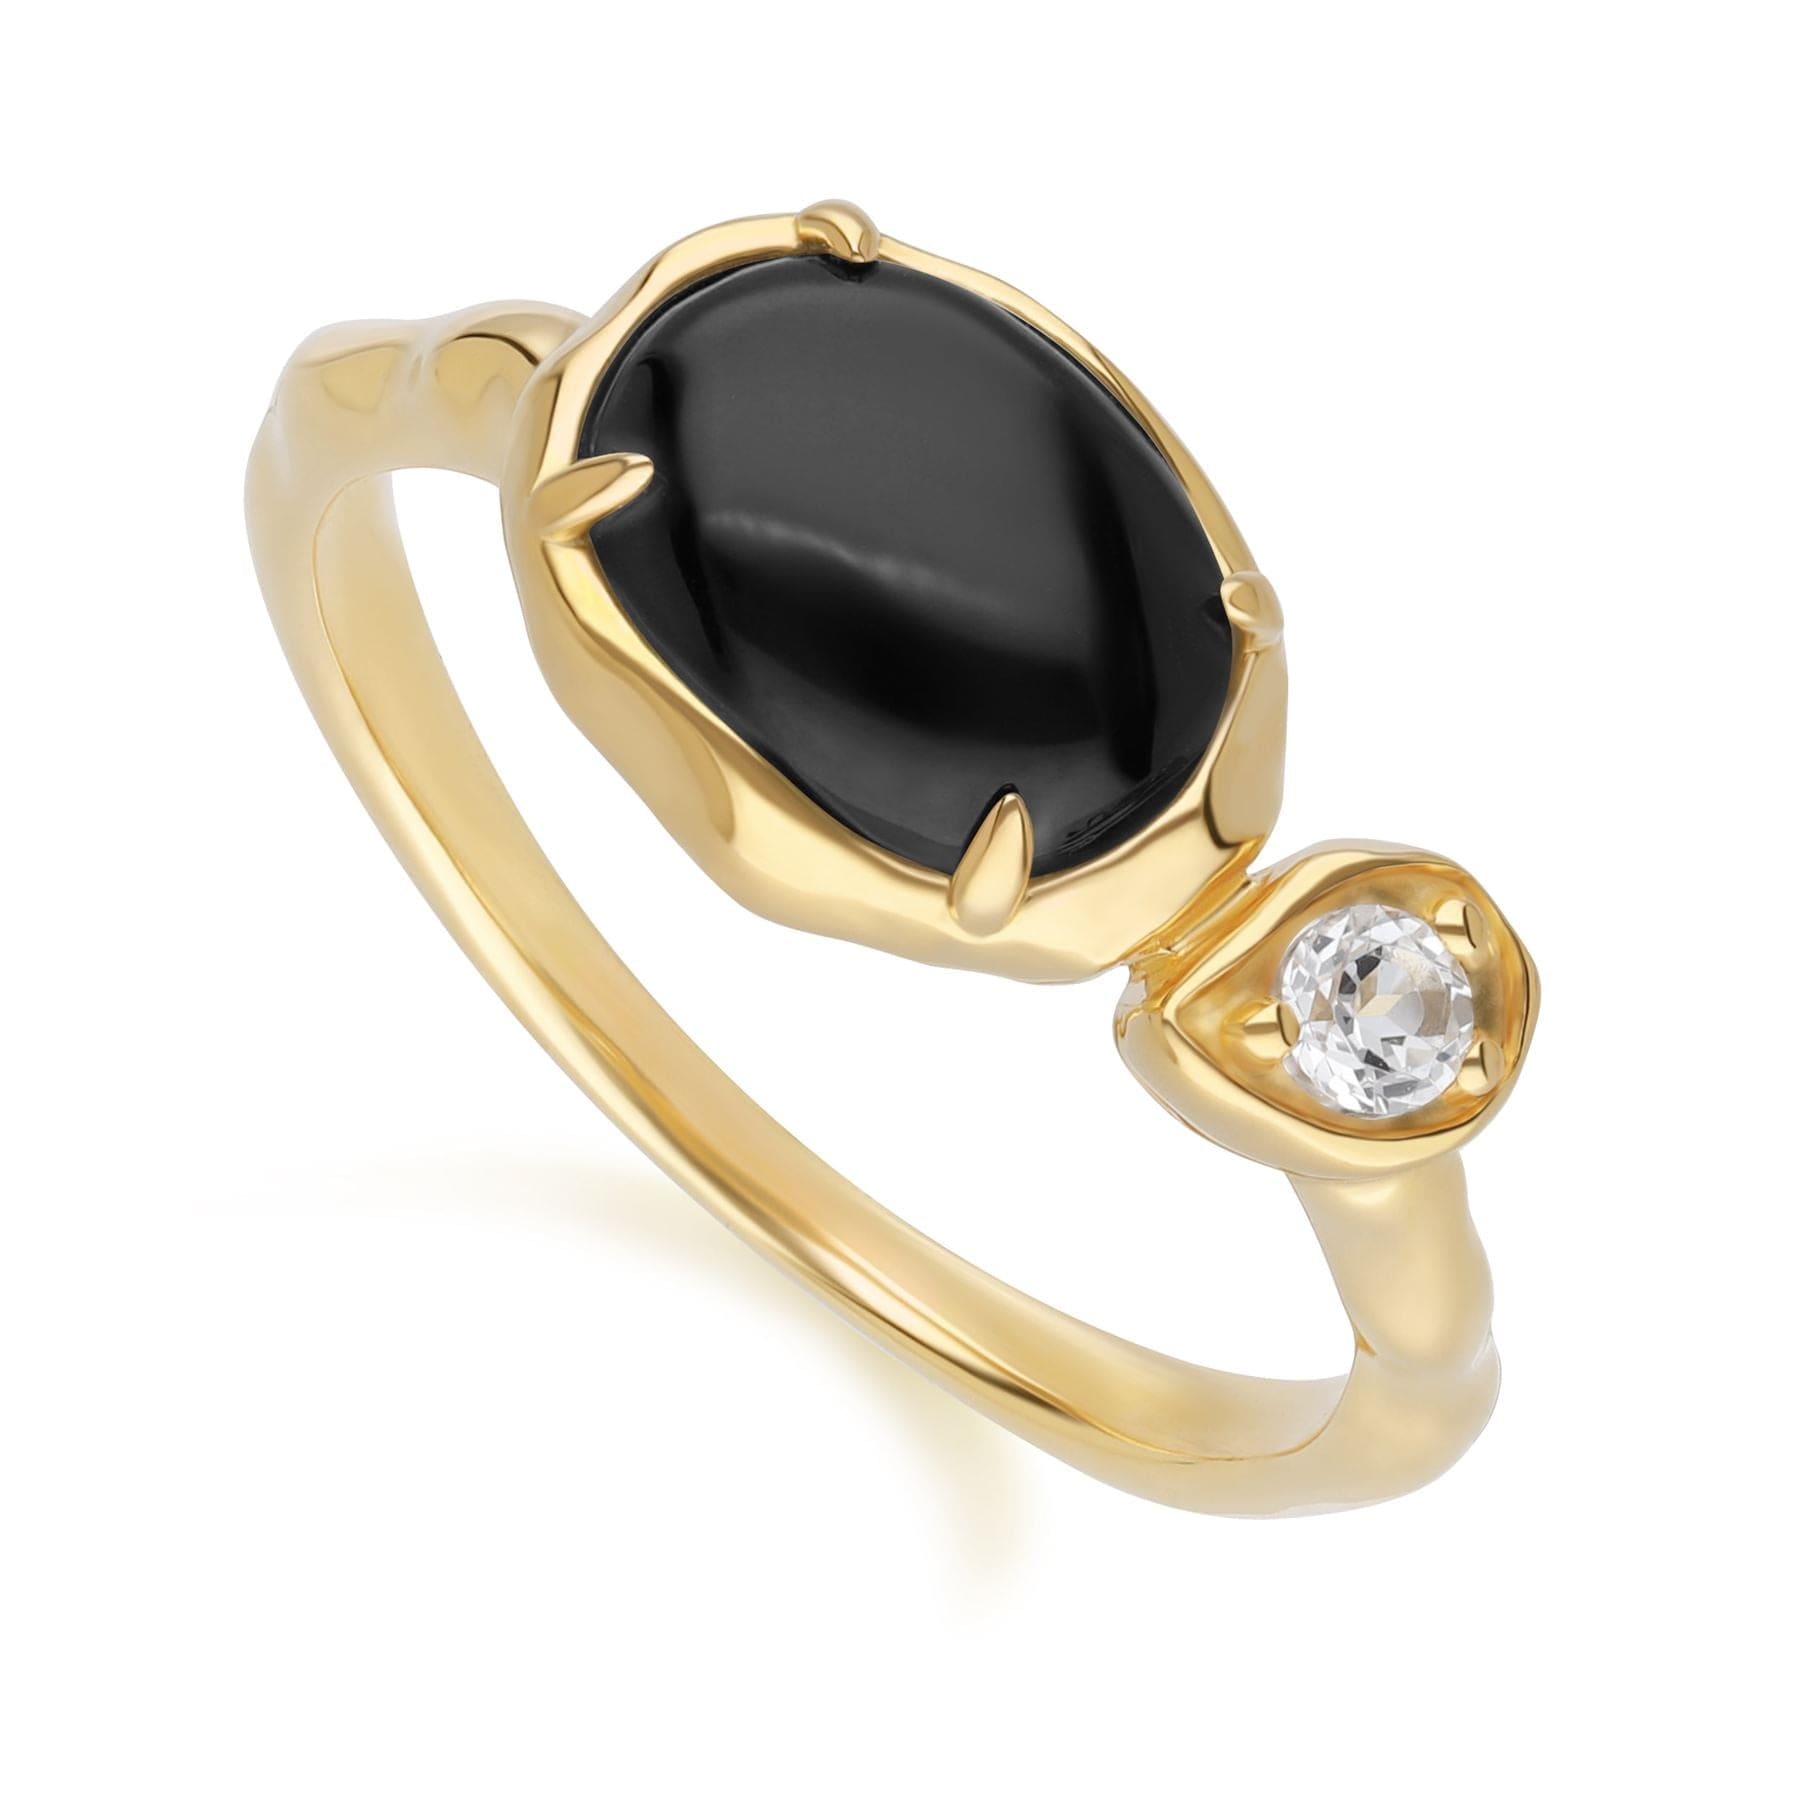 Irregular Oval Black Onyx & White Topaz Ring In 18ct Gold Plated SterlIng Silver